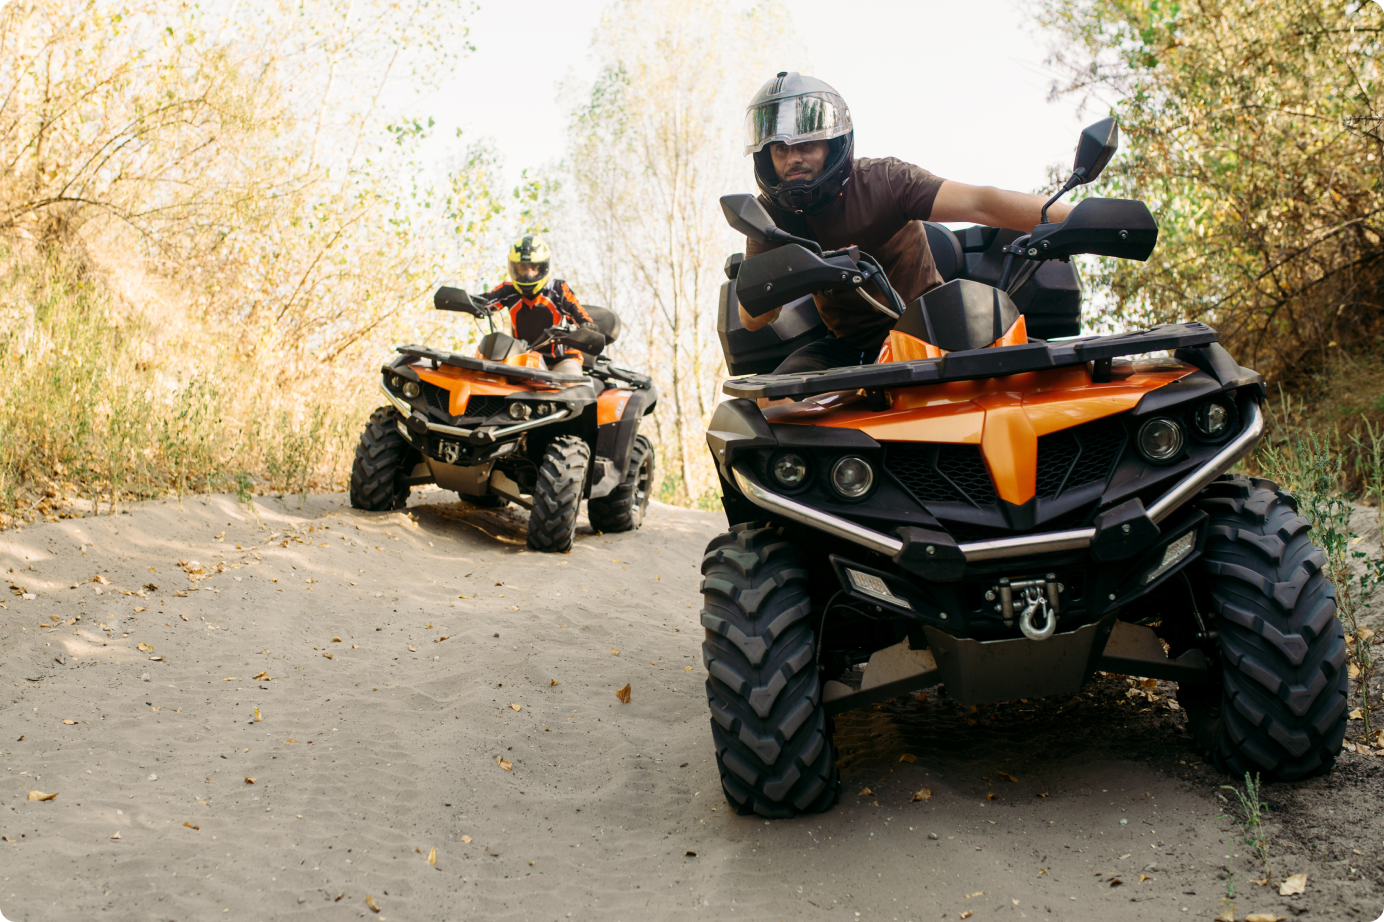 Friends riding atvs in a sandy area